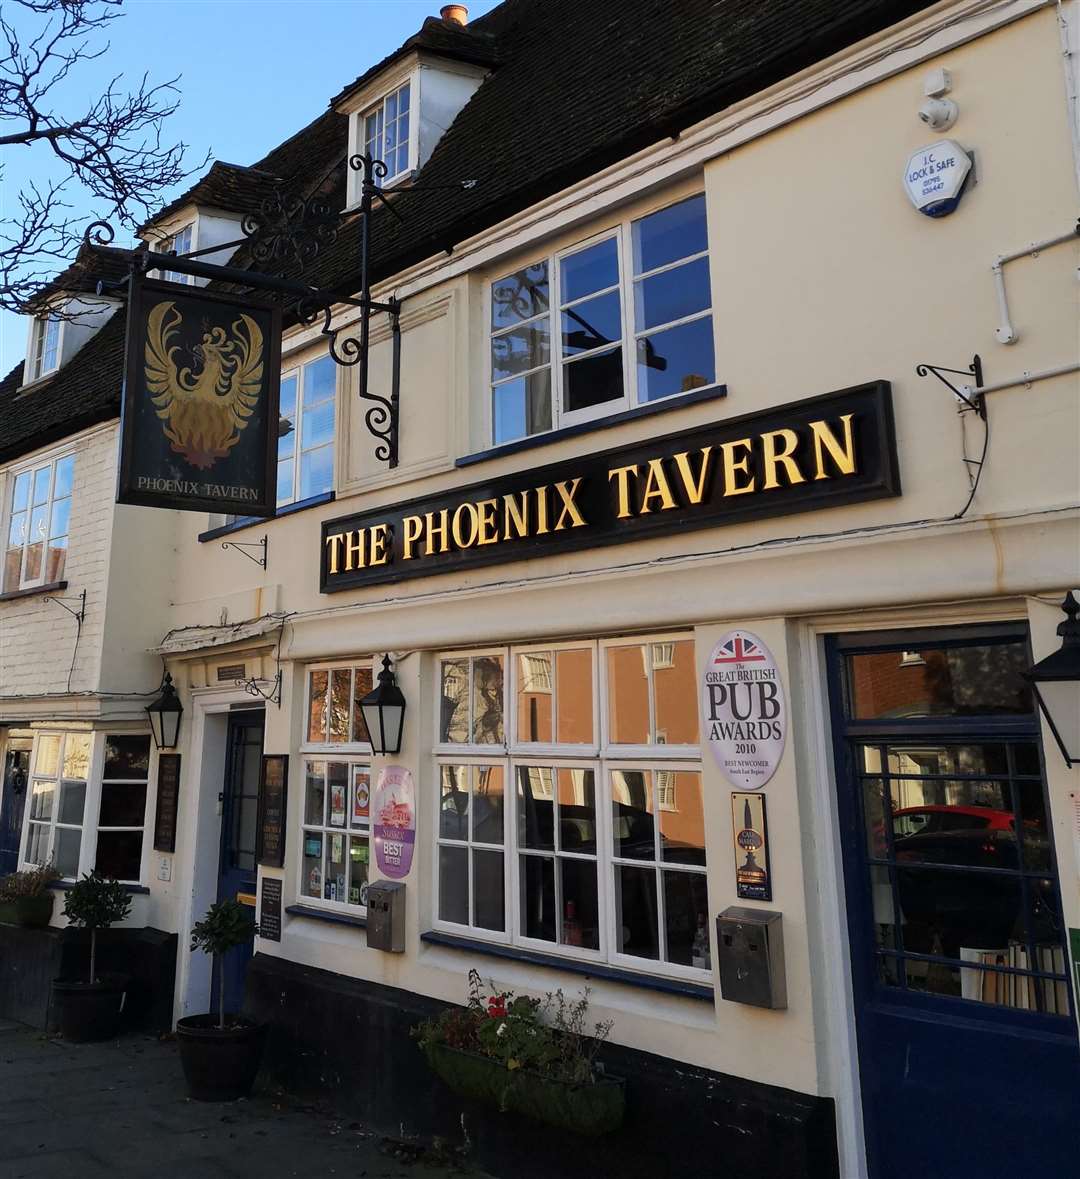 Staff at the The Phoenix Tavern in Faversham are required to be vaccinated